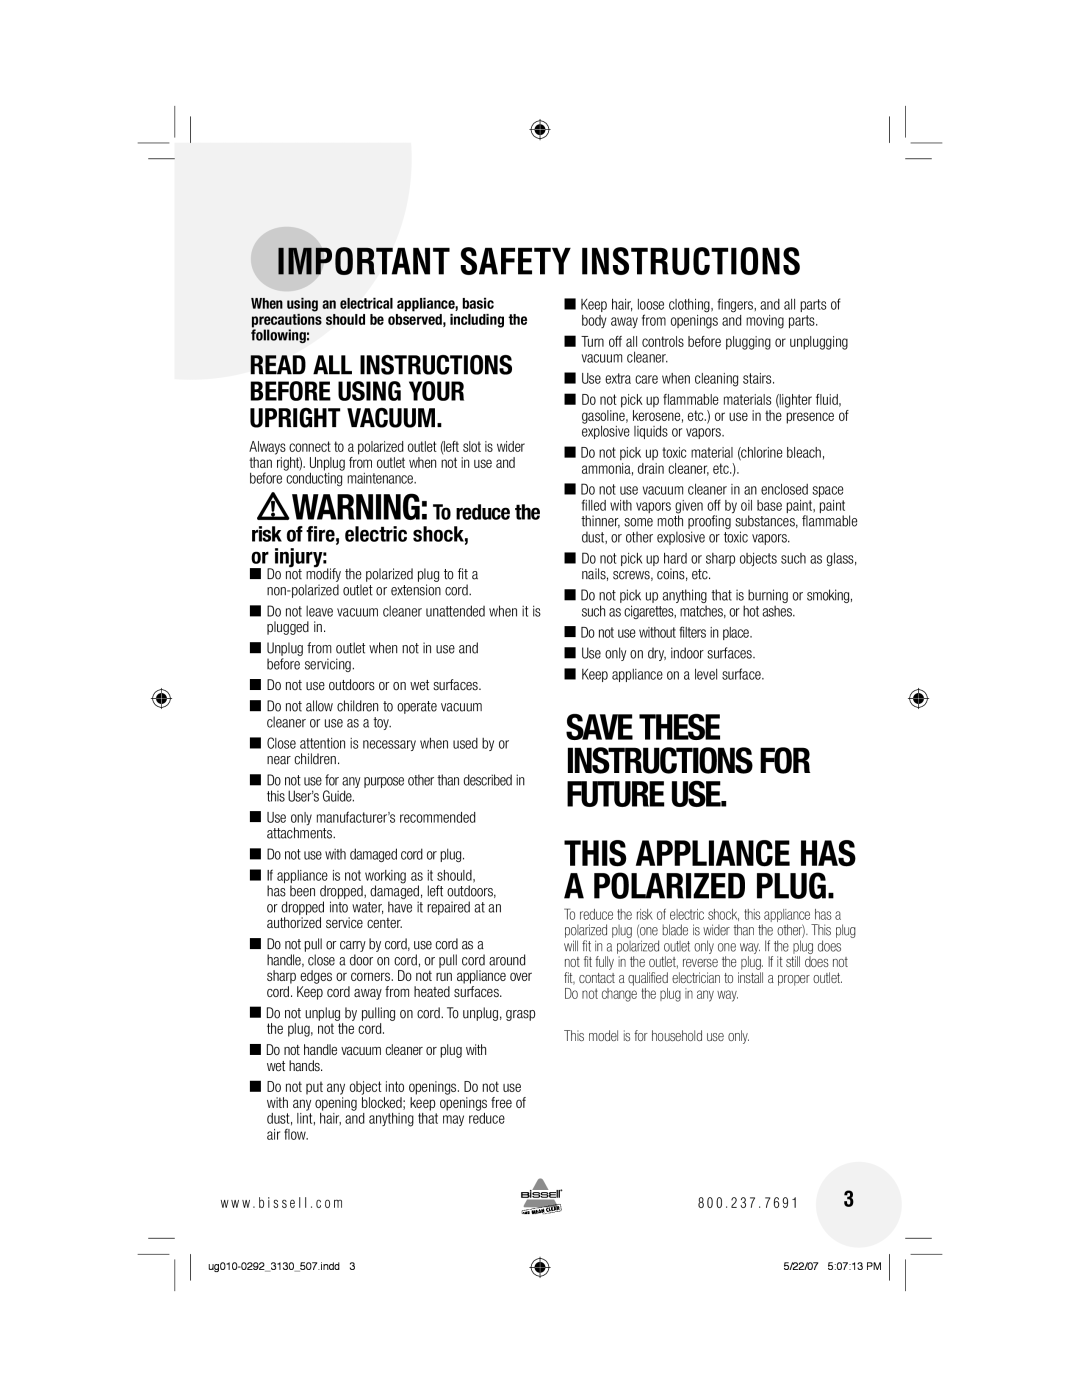 Bissell 3130 warranty or injury, Important Safety Instructions, Save These Instructions For Future Use 